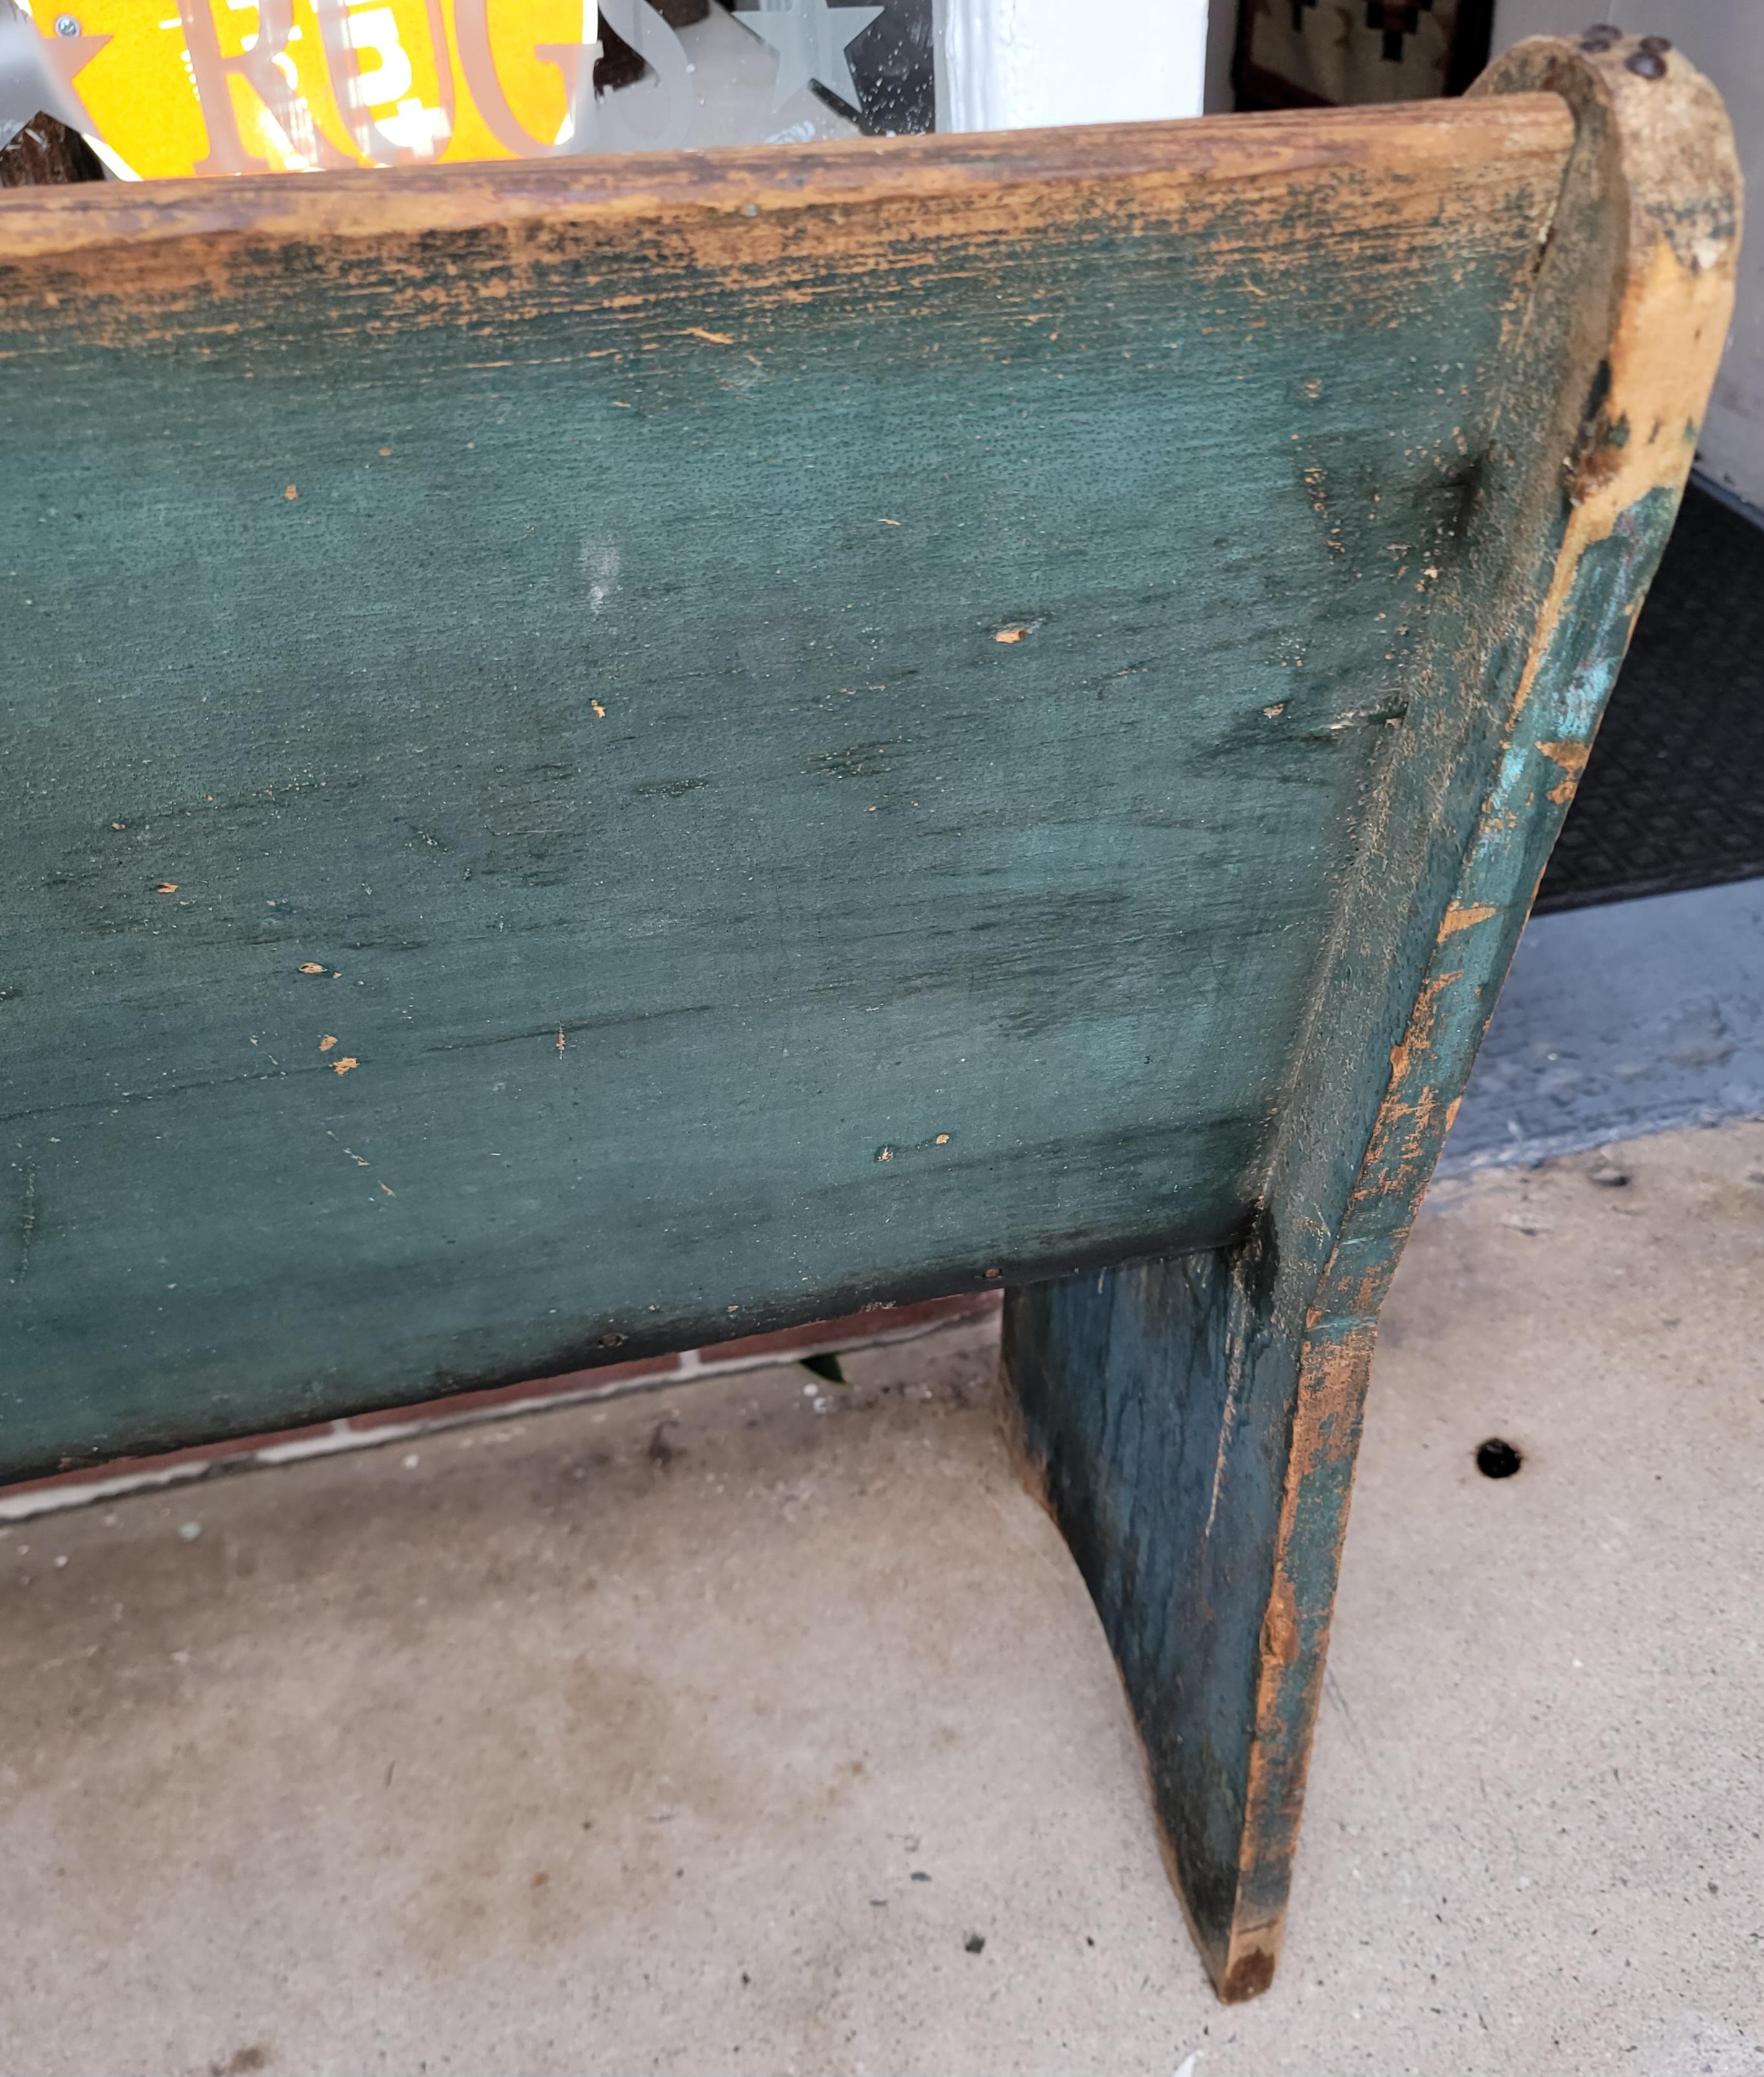 19th C original blue painted plank seat bench in fine condition and super sturdy.This rare find is in great as found condition.Super wonderful untouched blue painted surface.